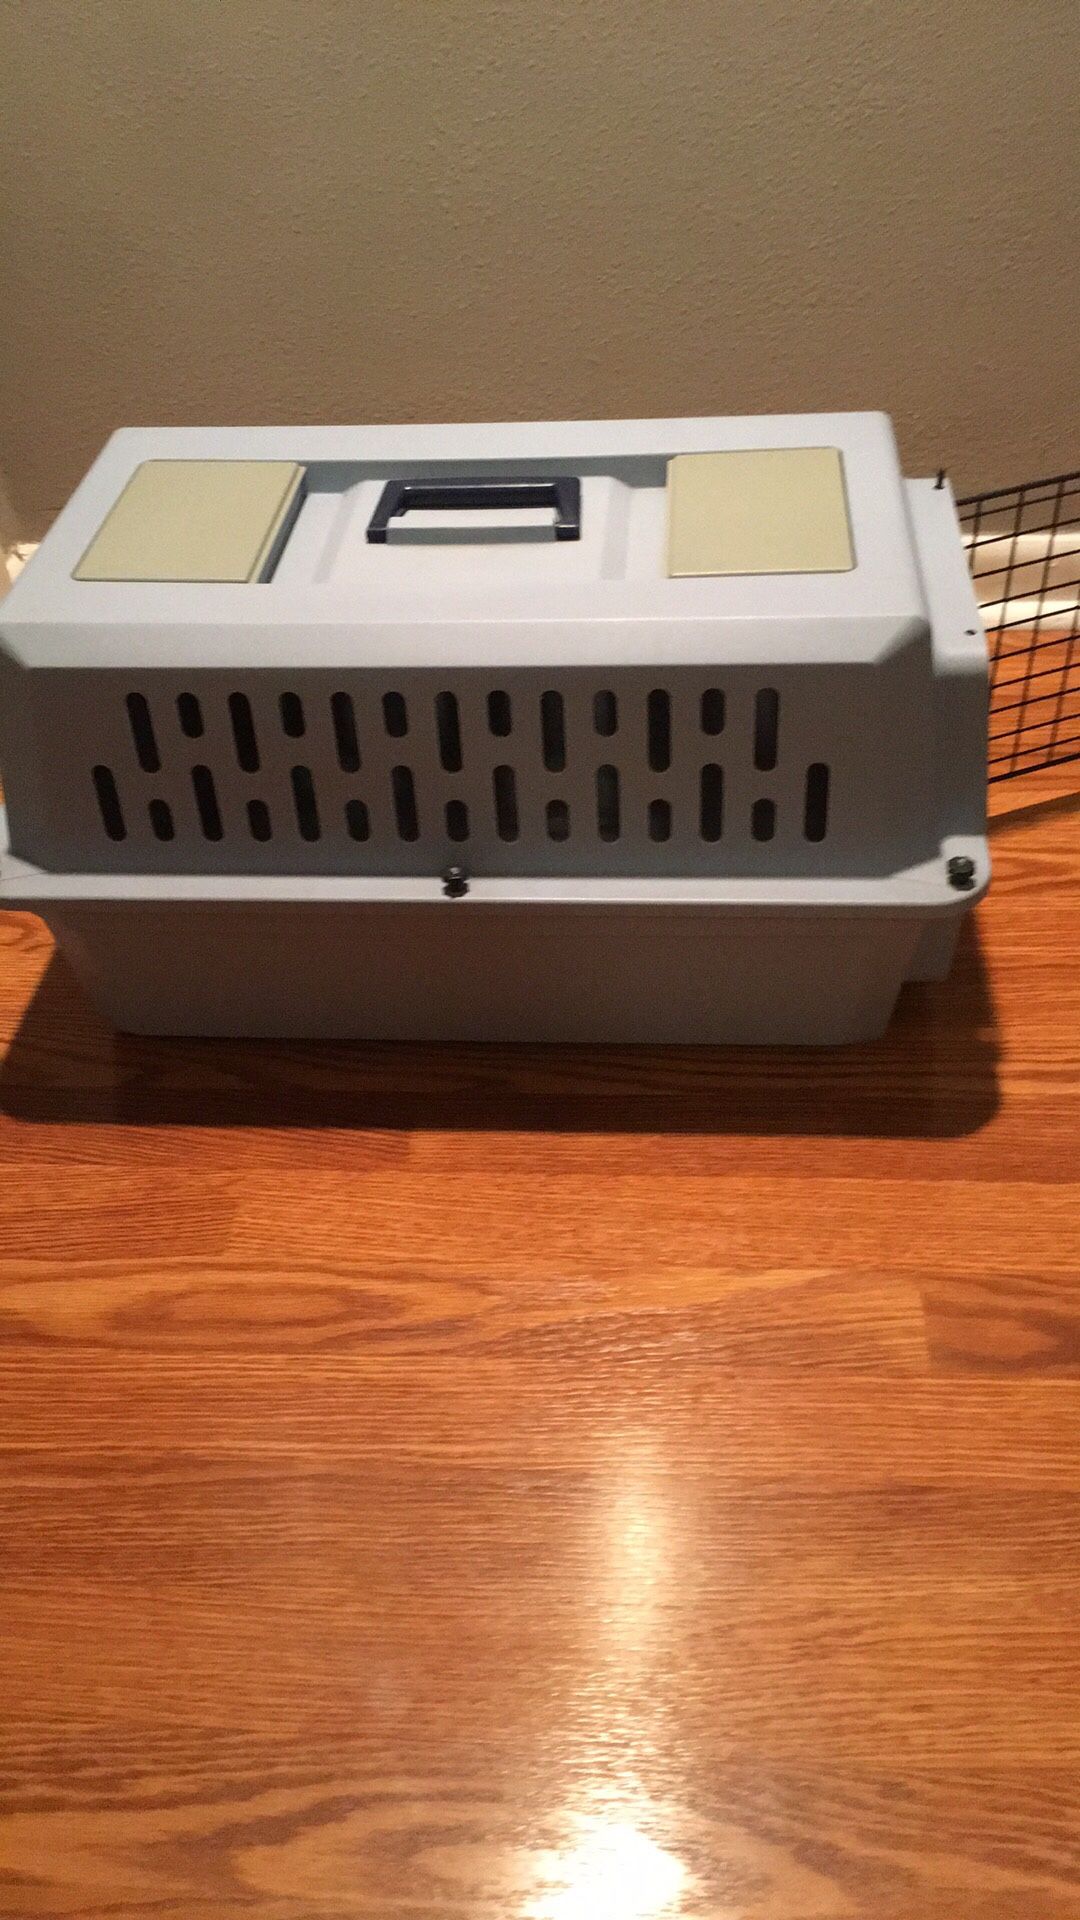 Small or medium pets crate (13x22x14)